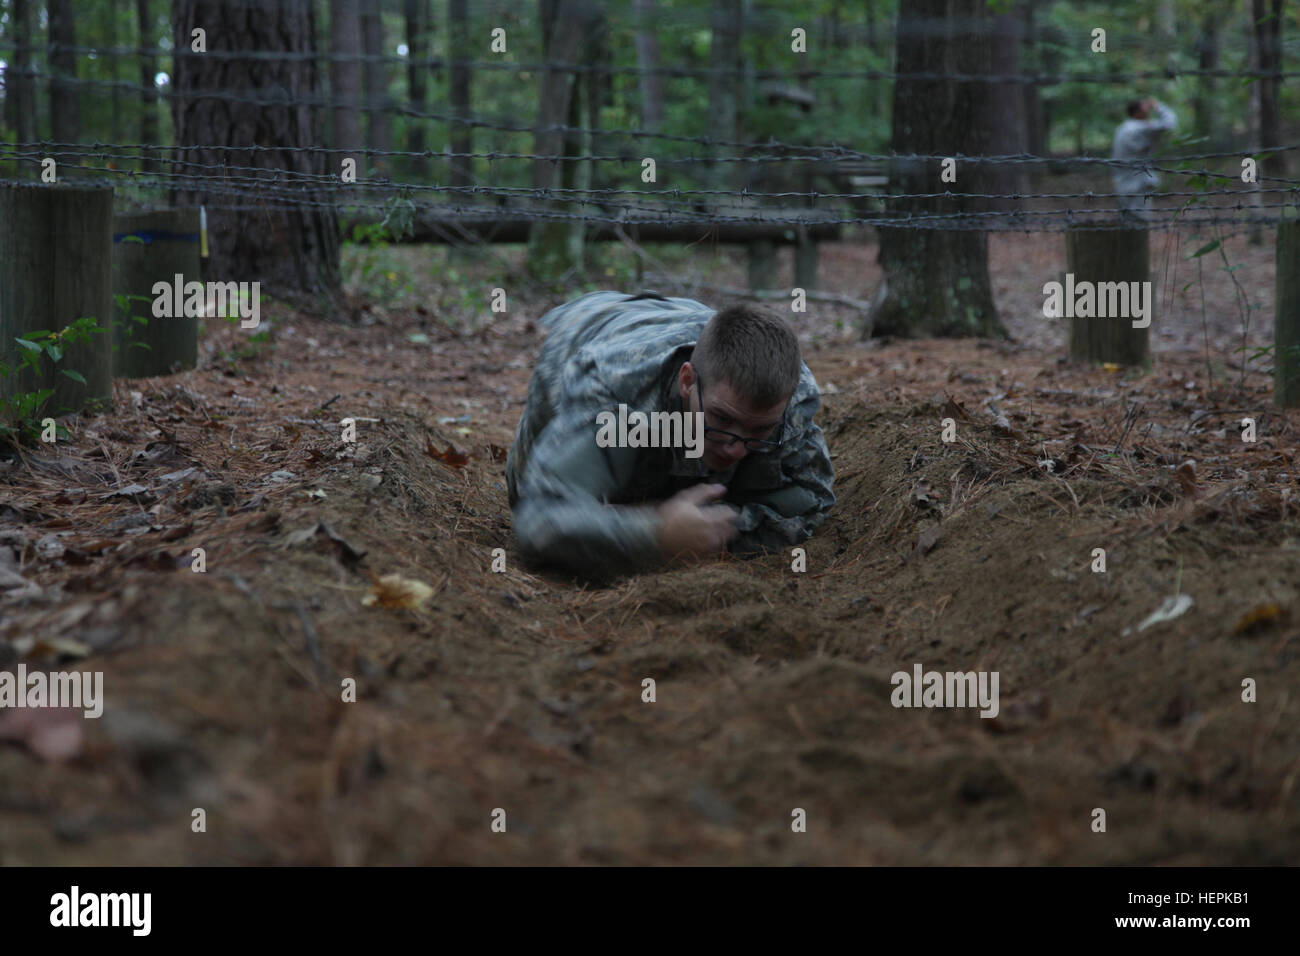 U.S. Army Pfc. Ian Ryan, assigned to 55th Signal Company (Combat Camera), high crawls under barbed wire while going through an obstacle course during a Field Training Exercise (FTX) at Fort AP Hill, Va., Sept. 28, 2015. The 55th Signal Company conducts a FTX twice a year in order to maintain tactical proficiency, as well as to develop and prepare Soldiers for the rigor of combat. (U.S. Army photo by Pfc. Elliott Page/Released). 55th Signal Company Fall FTX 150928-A-YI096-806 Stock Photo